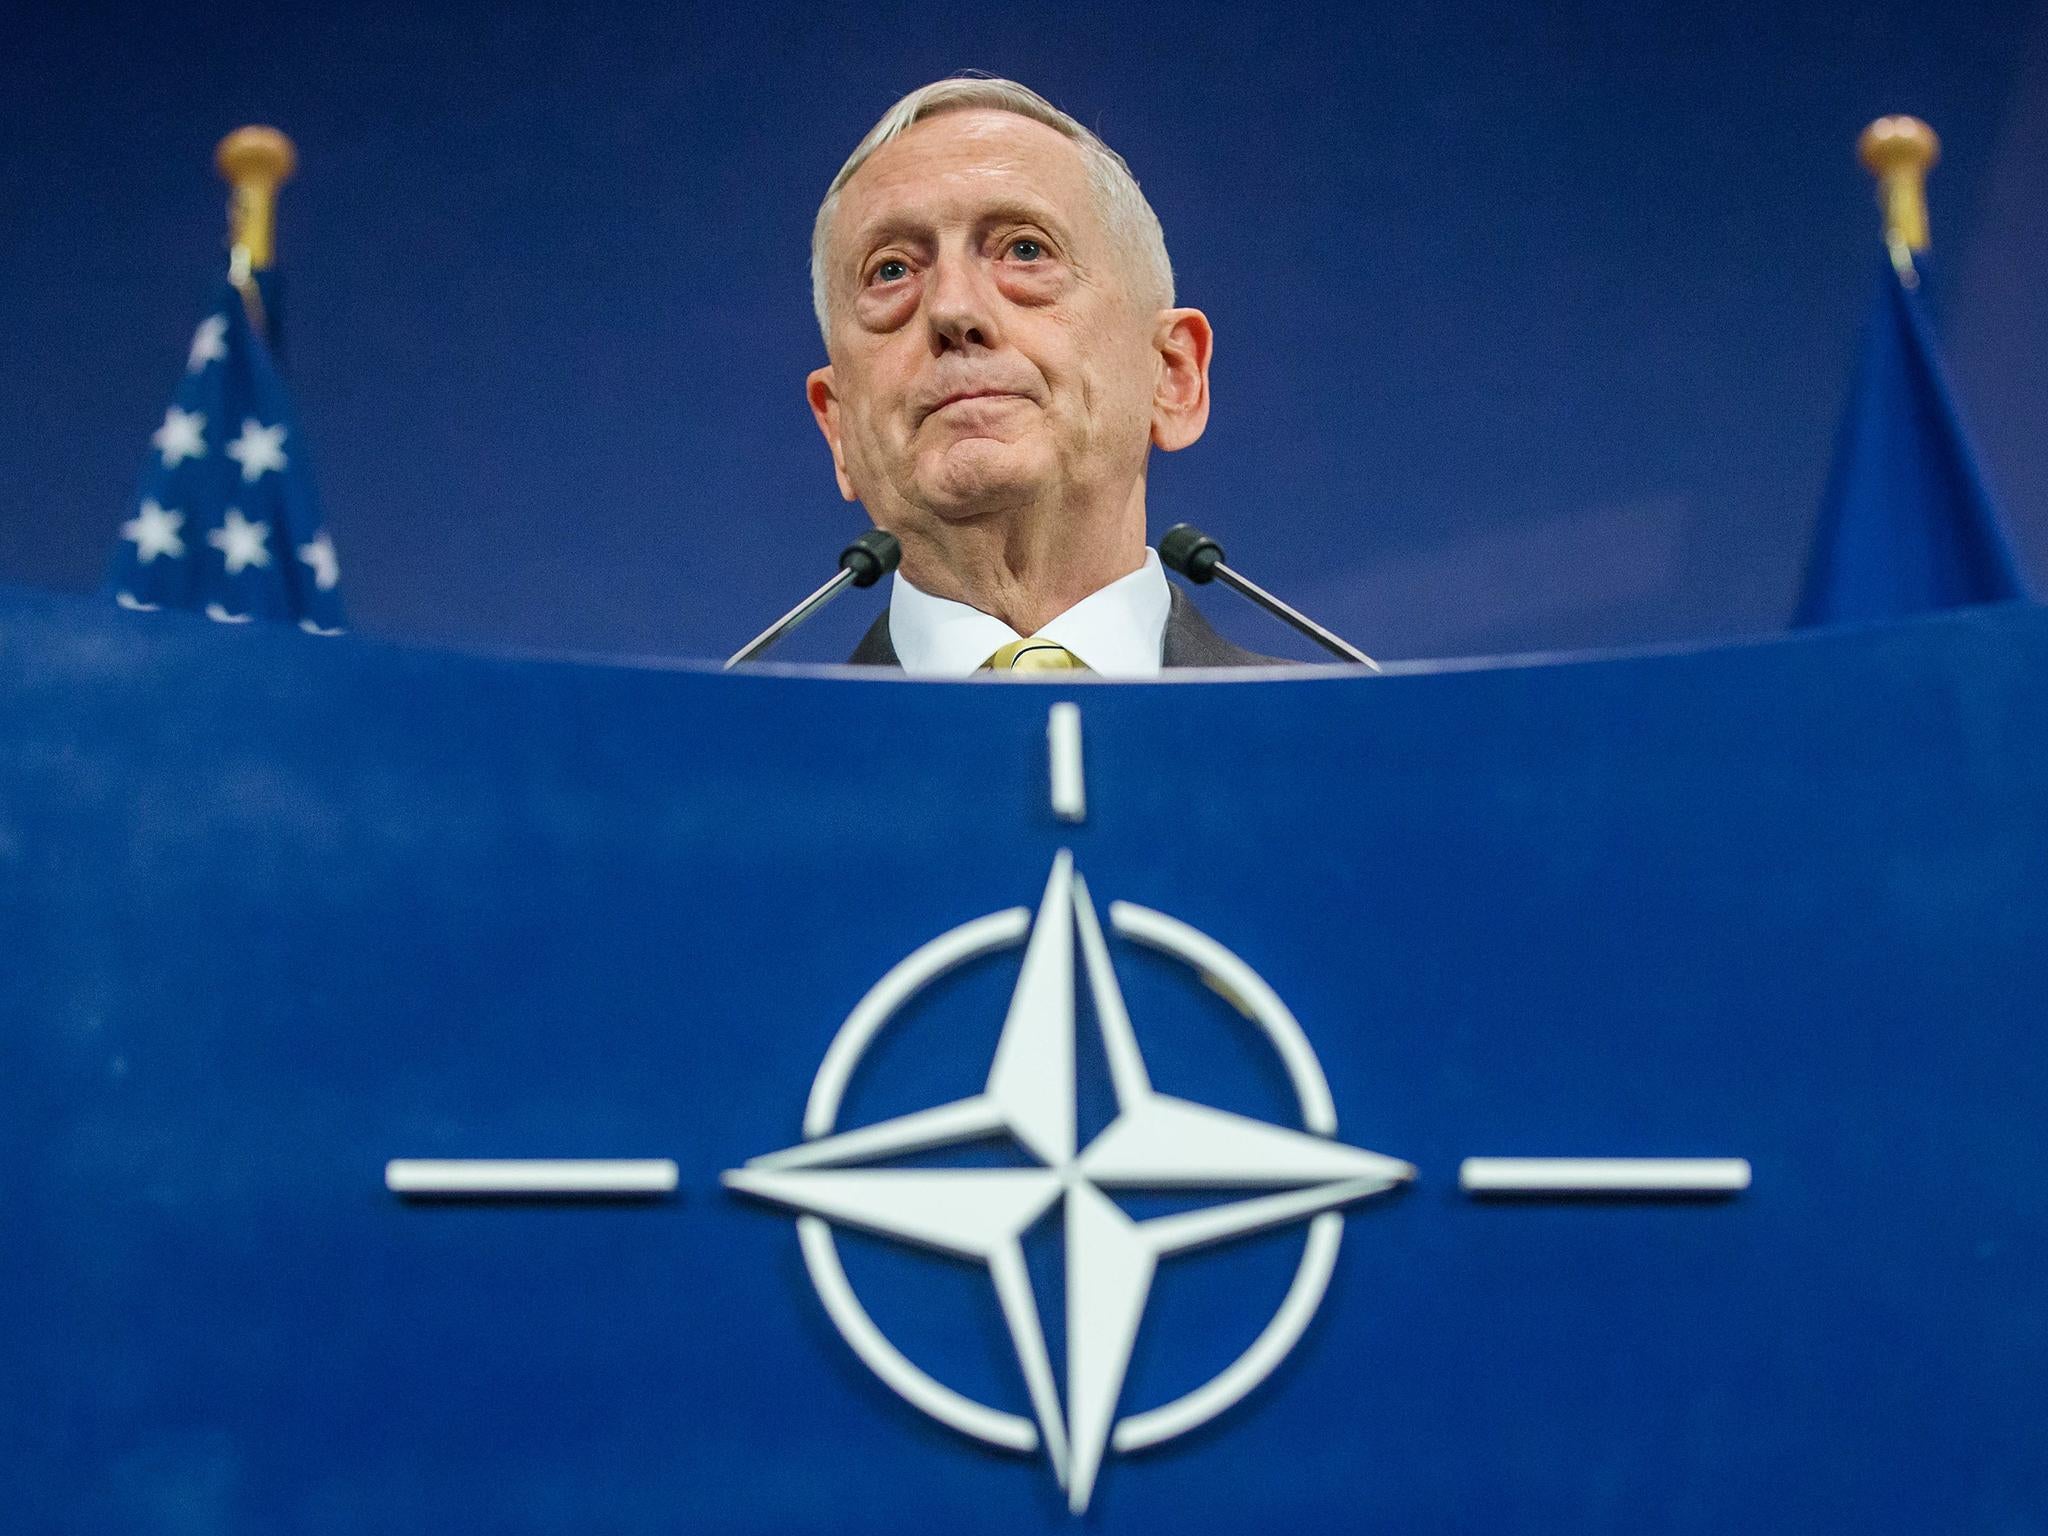 General James Mattis speaks to reporters at the end of the second day of a Nato conference in Brussels